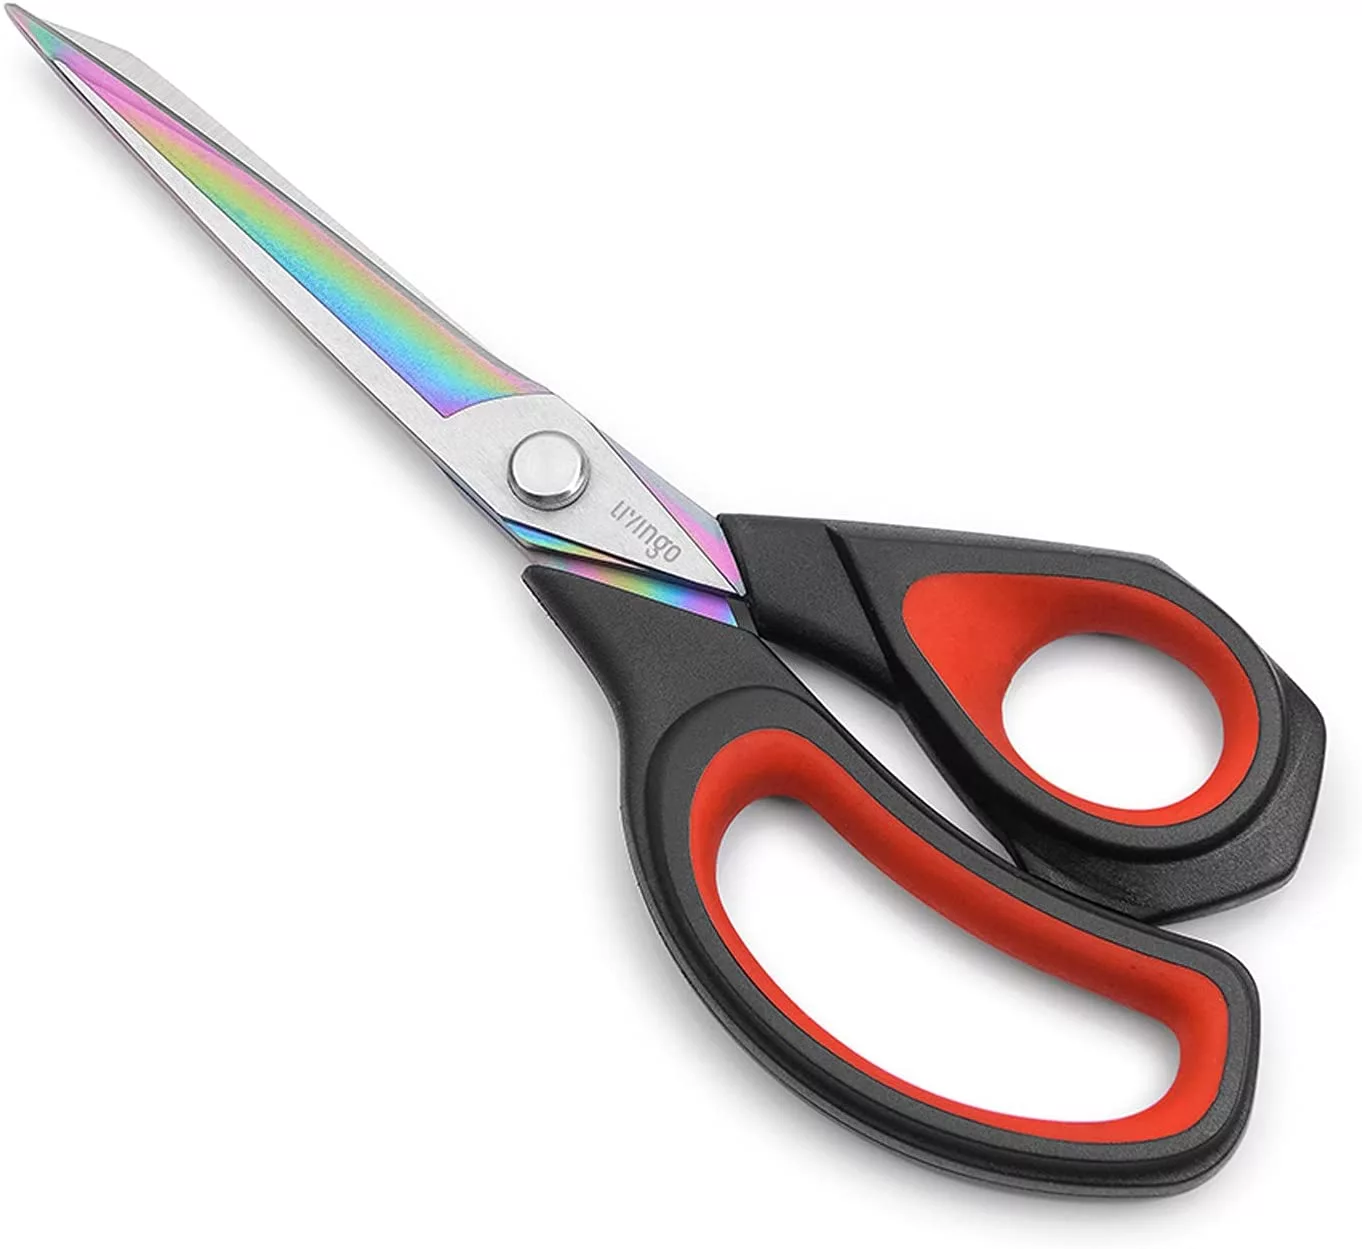 Scissors - Best Hard Wax Beads to Use at Home